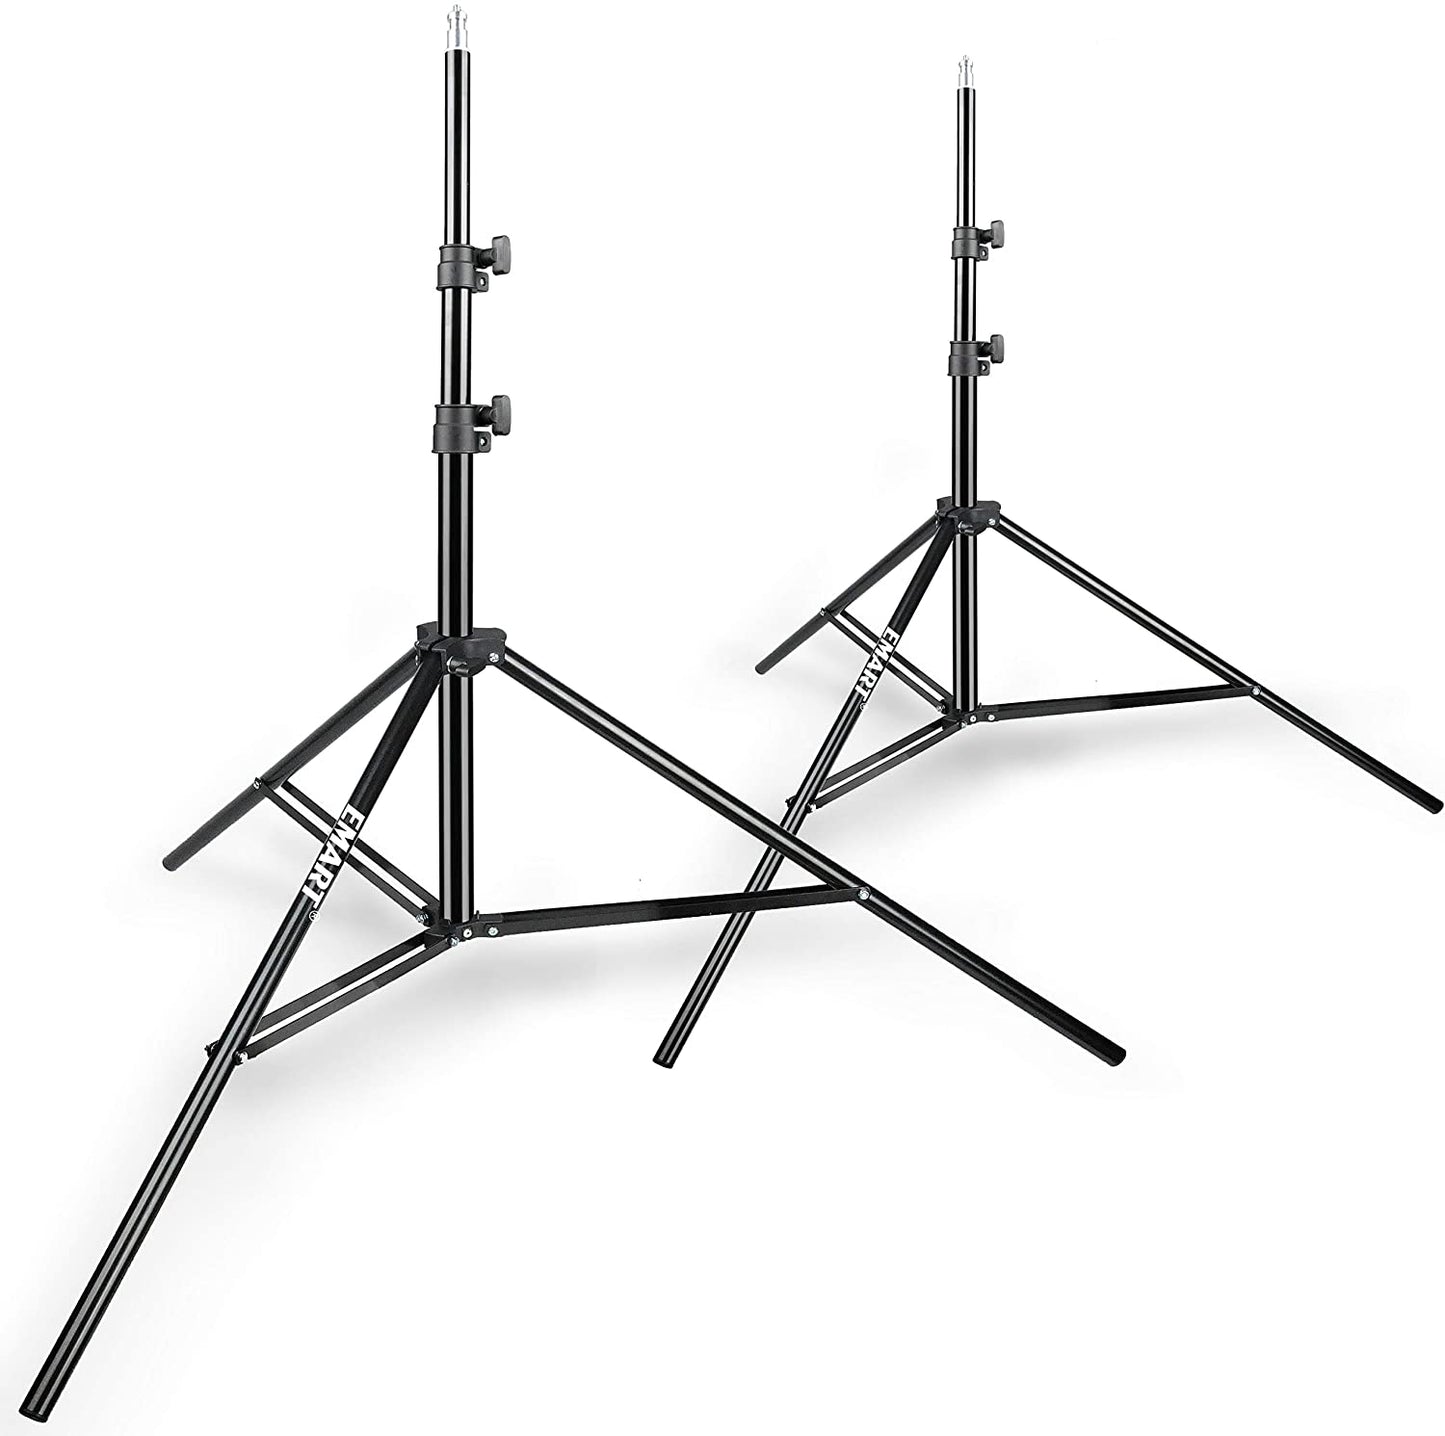 EMART 6.2ft/8.5ft Photography Light Stands for Photo Video Studio and Product Portrait Shooting - EMART INTERNATIONAL, INC (Official Website)